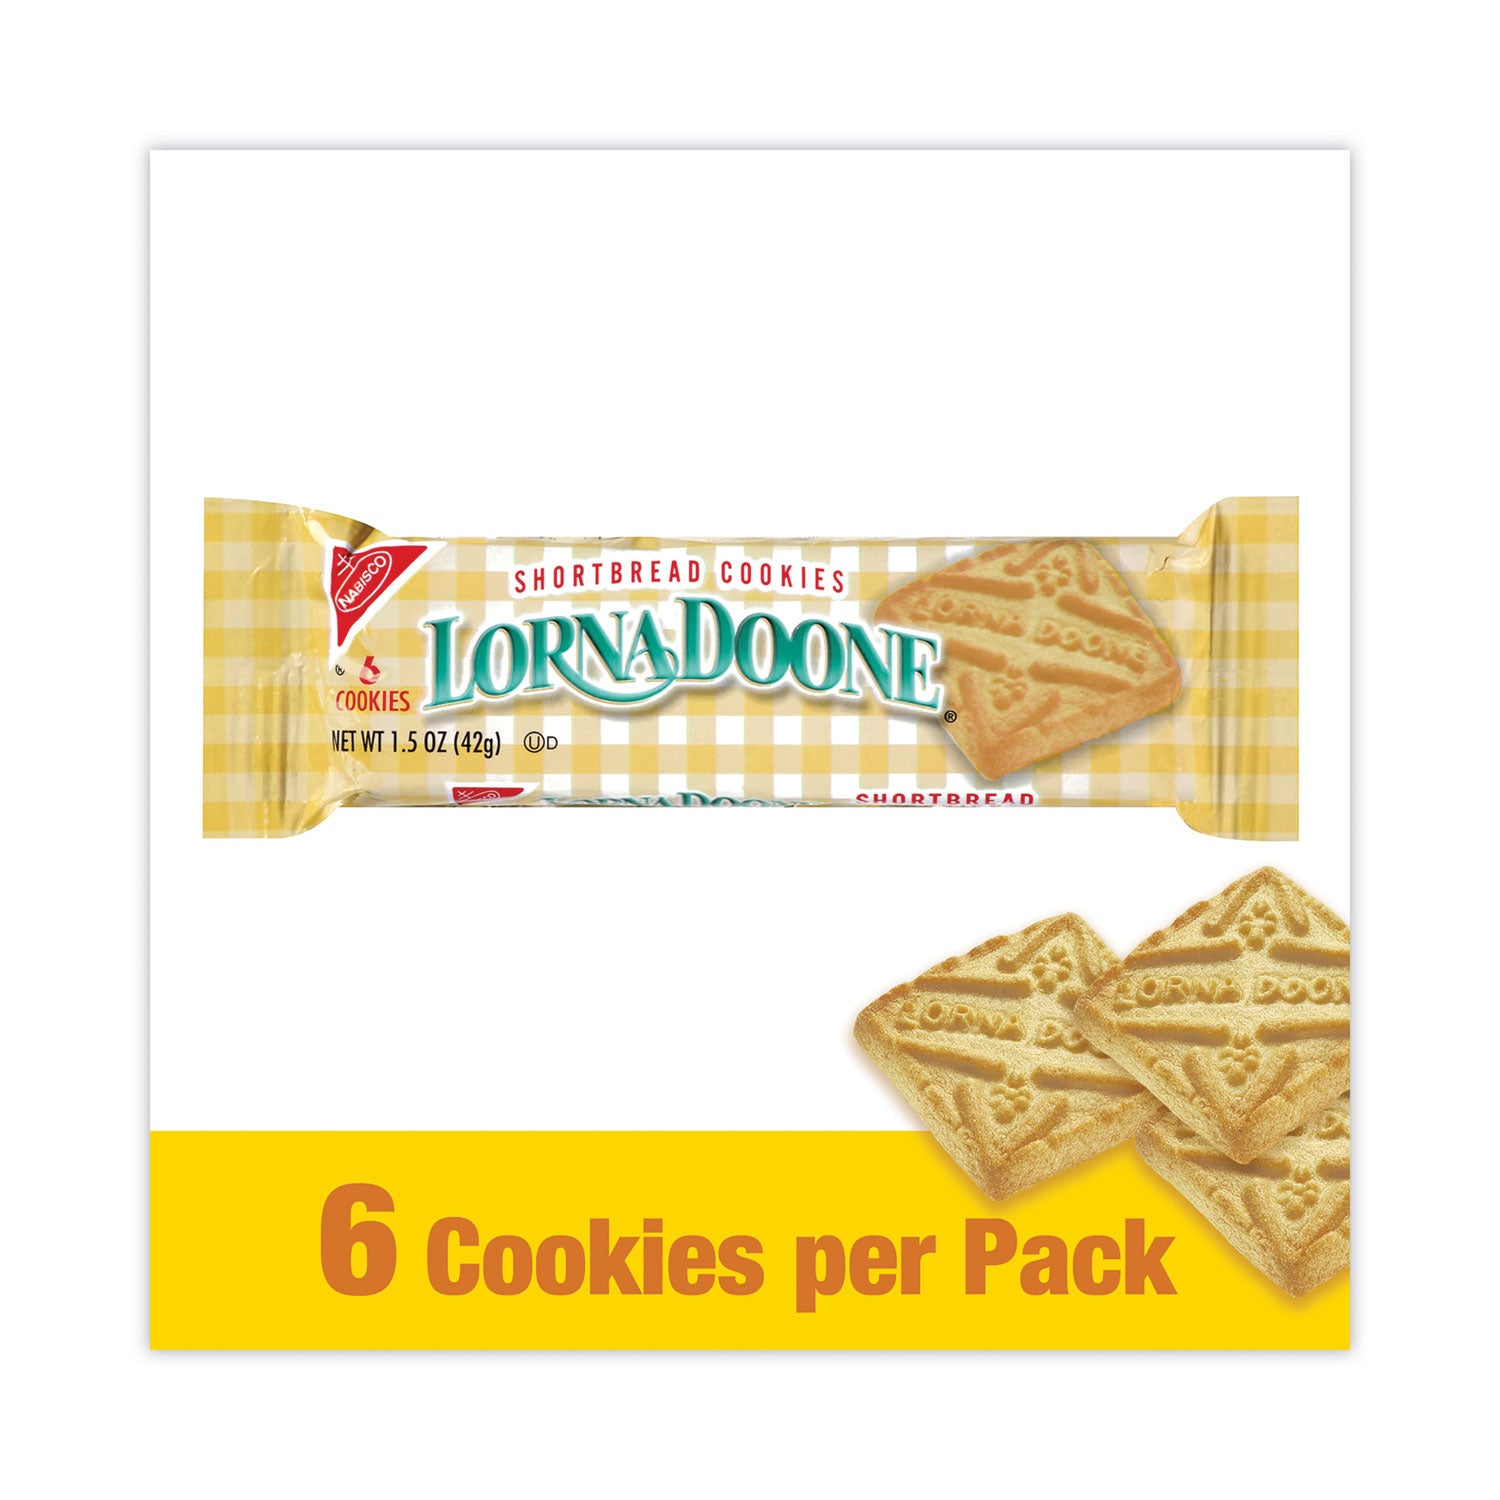 lorna-doone-shortbread-cookies-15-oz-packet-30-packets-carton-ships-in-1-3-business-days_grr22001042 - 4